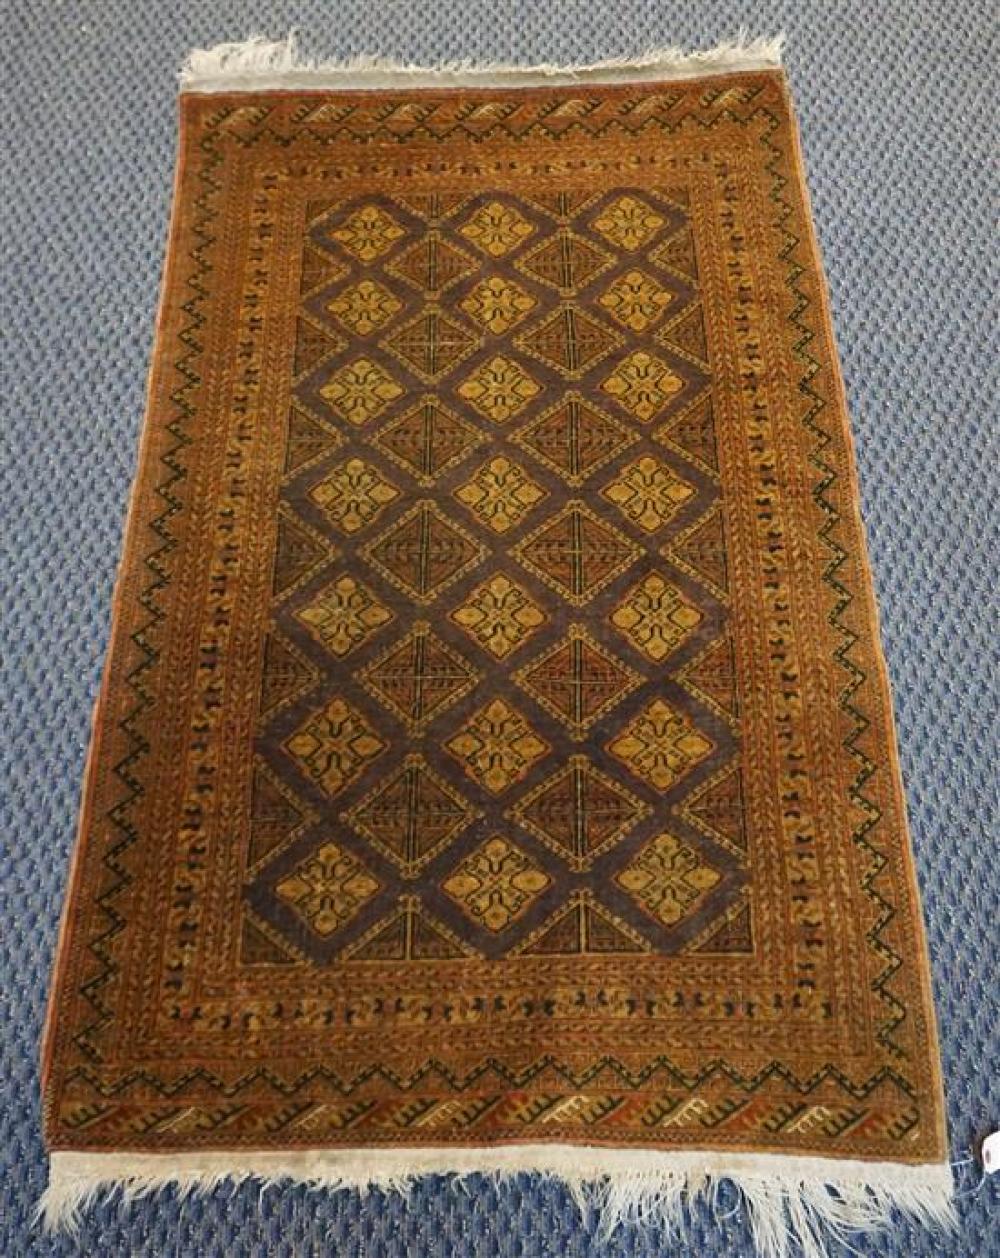 TURKOMAN RUG 5 FT 5 IN X 3 FT 320a16